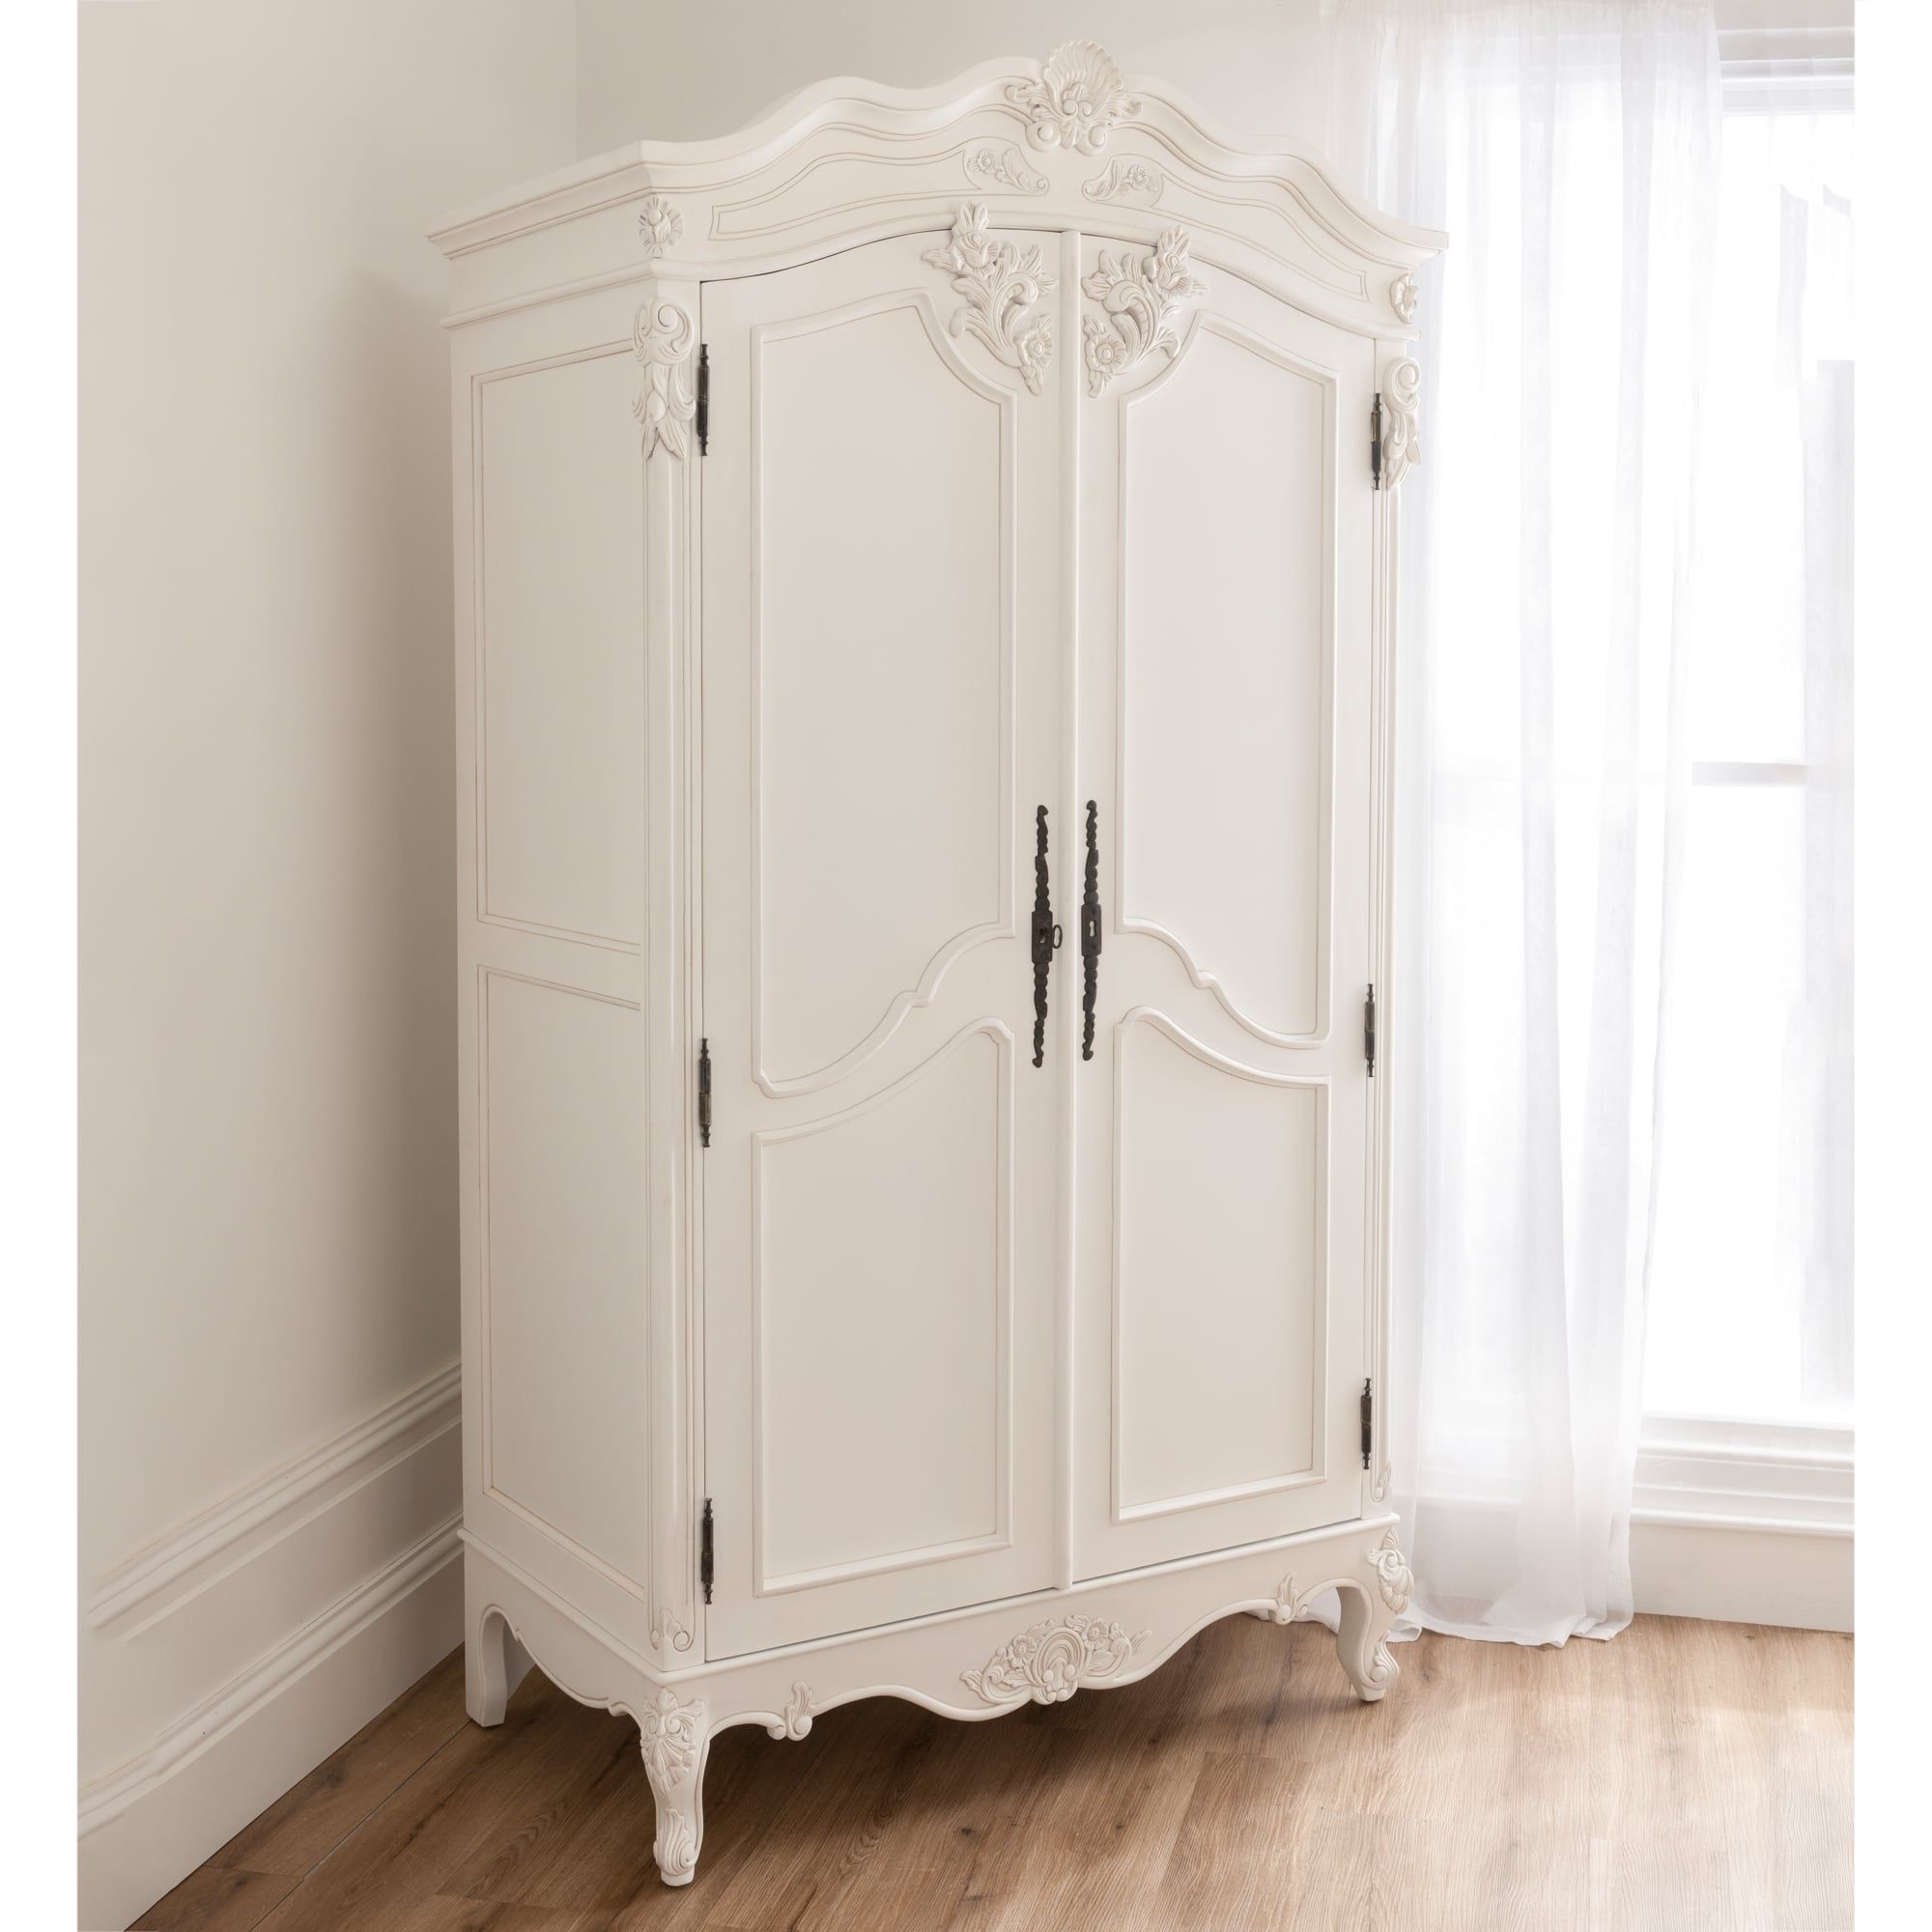 Baroque Antique French Wardrobe Is Available Online At Homesdirect365 Intended For White French Style Wardrobes (View 5 of 20)